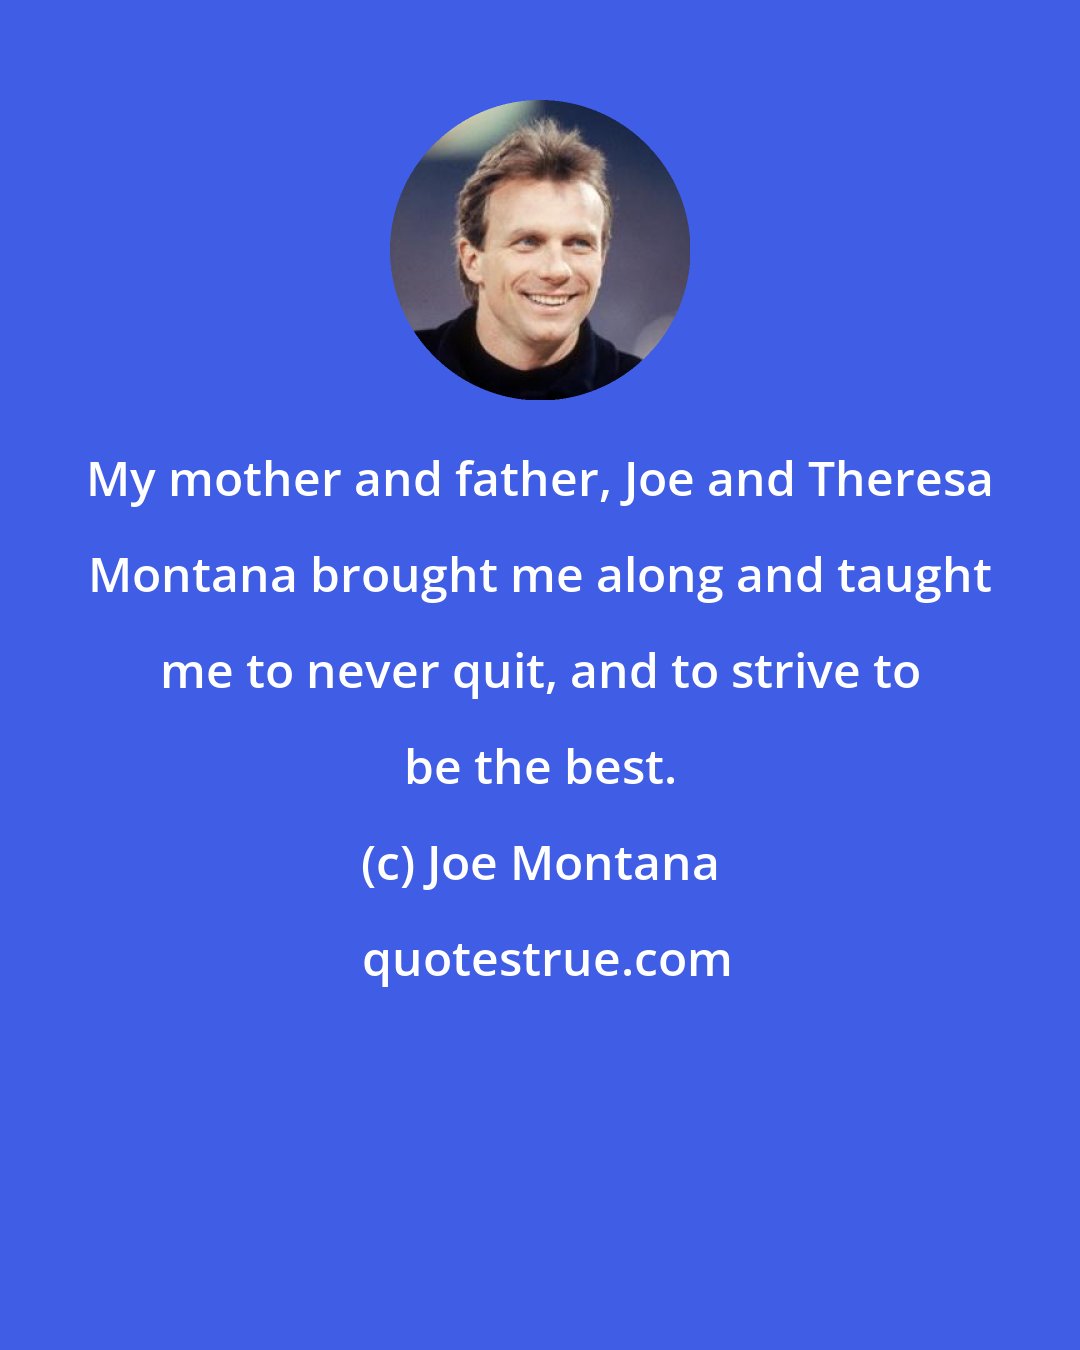 Joe Montana: My mother and father, Joe and Theresa Montana brought me along and taught me to never quit, and to strive to be the best.